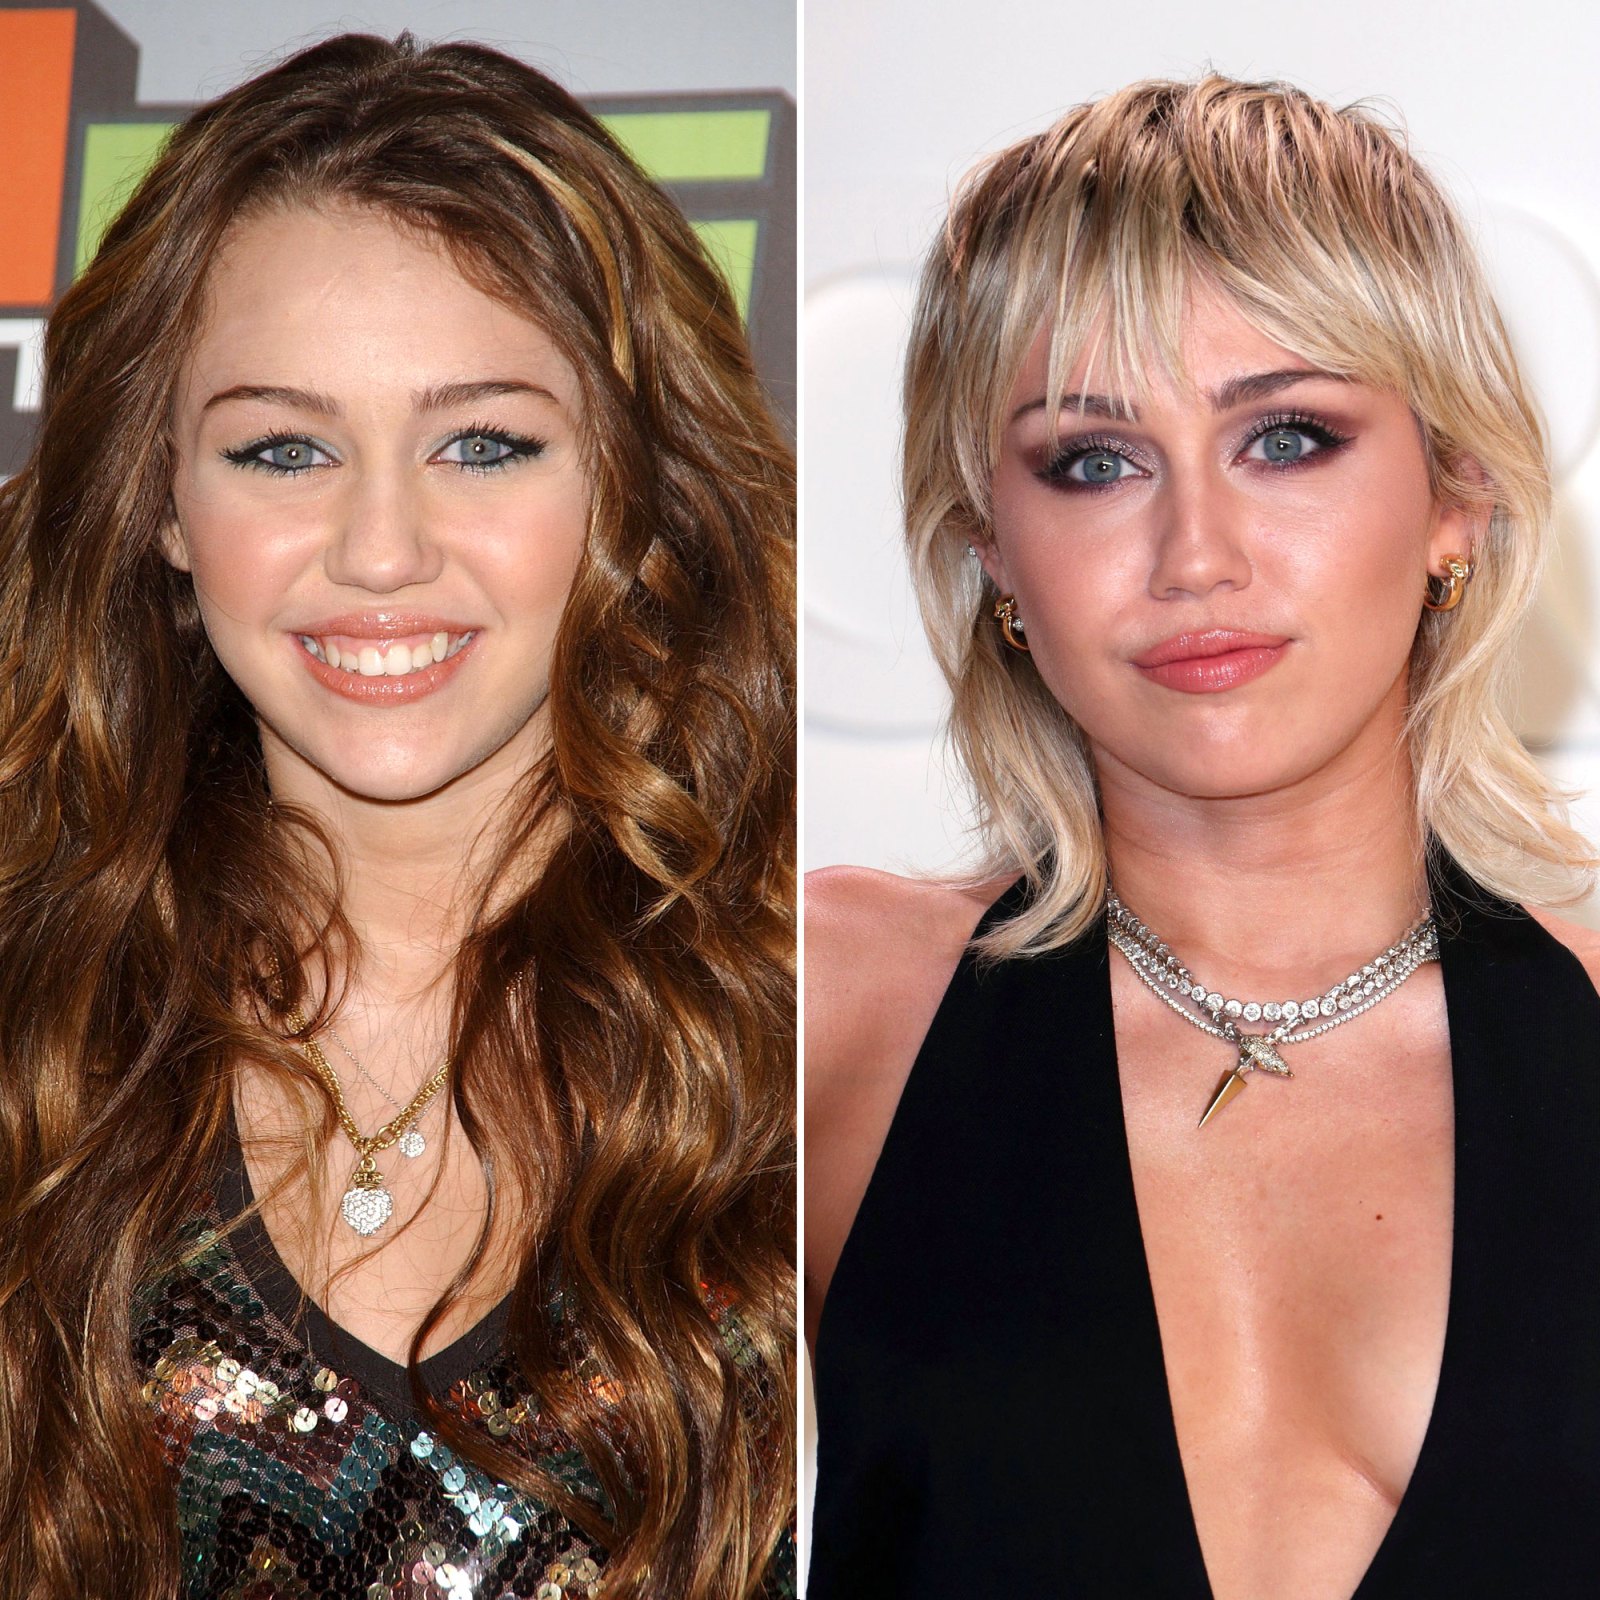 Miley Cyrus Says Public Judges Her Well-Being Based on Her Hair